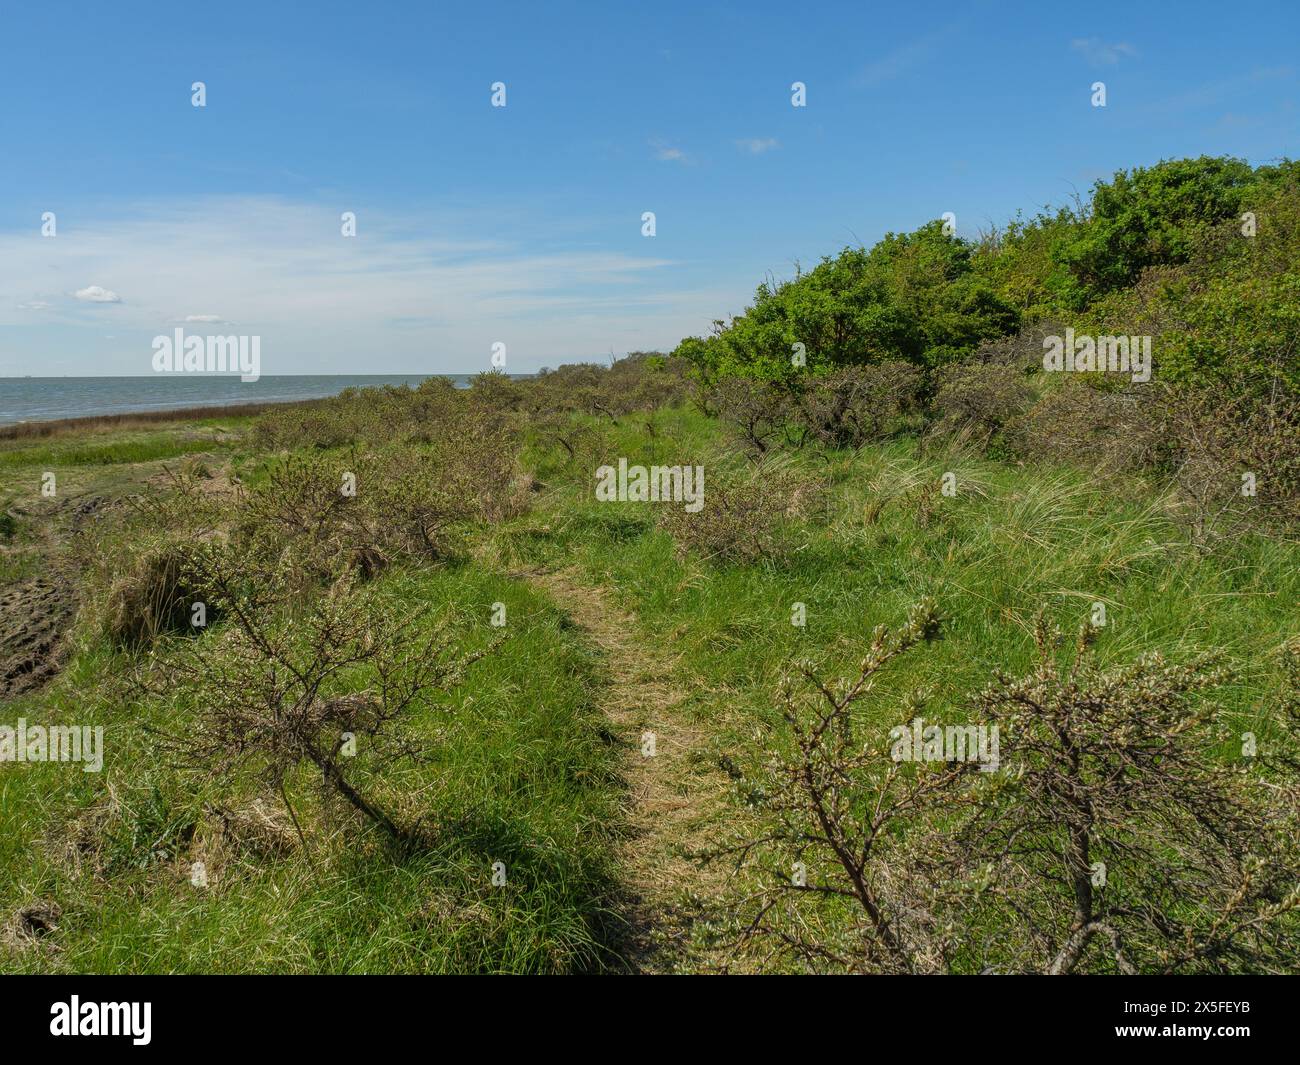 the island of Ameland in the north sea Stock Photo